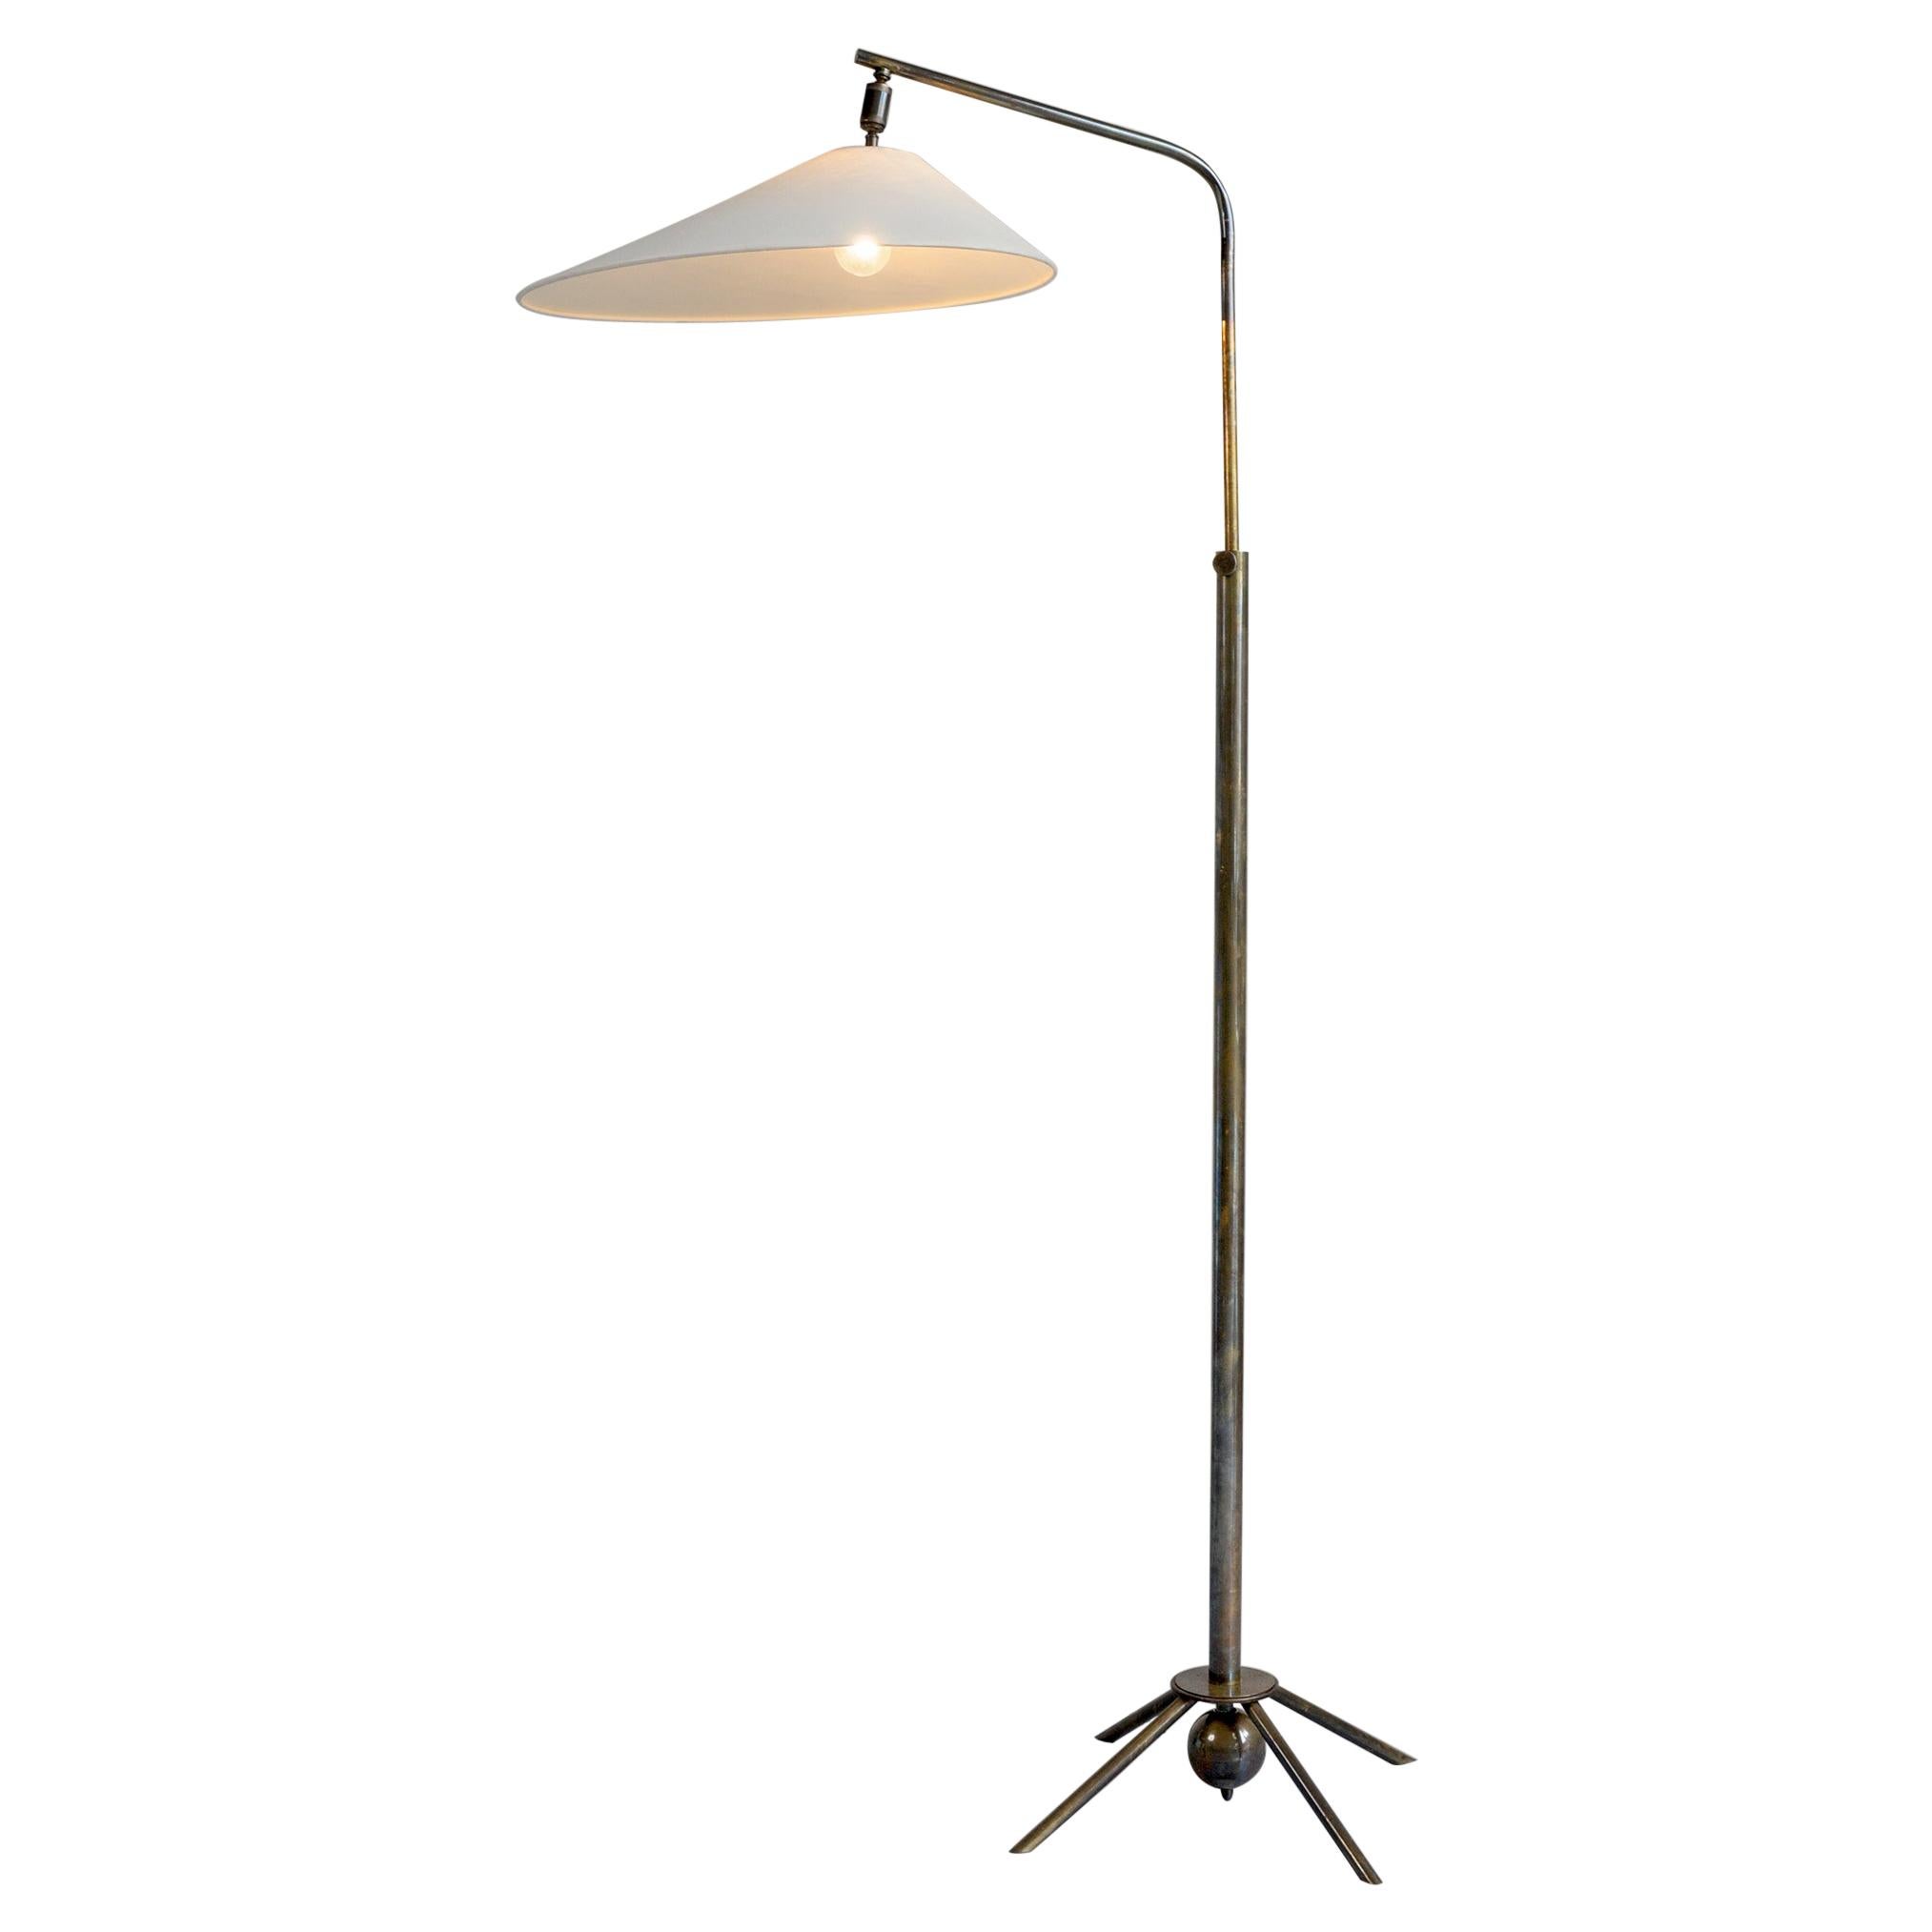 Kobis et Lorence, Floor Lamp with Adjustable Height, France, 1953